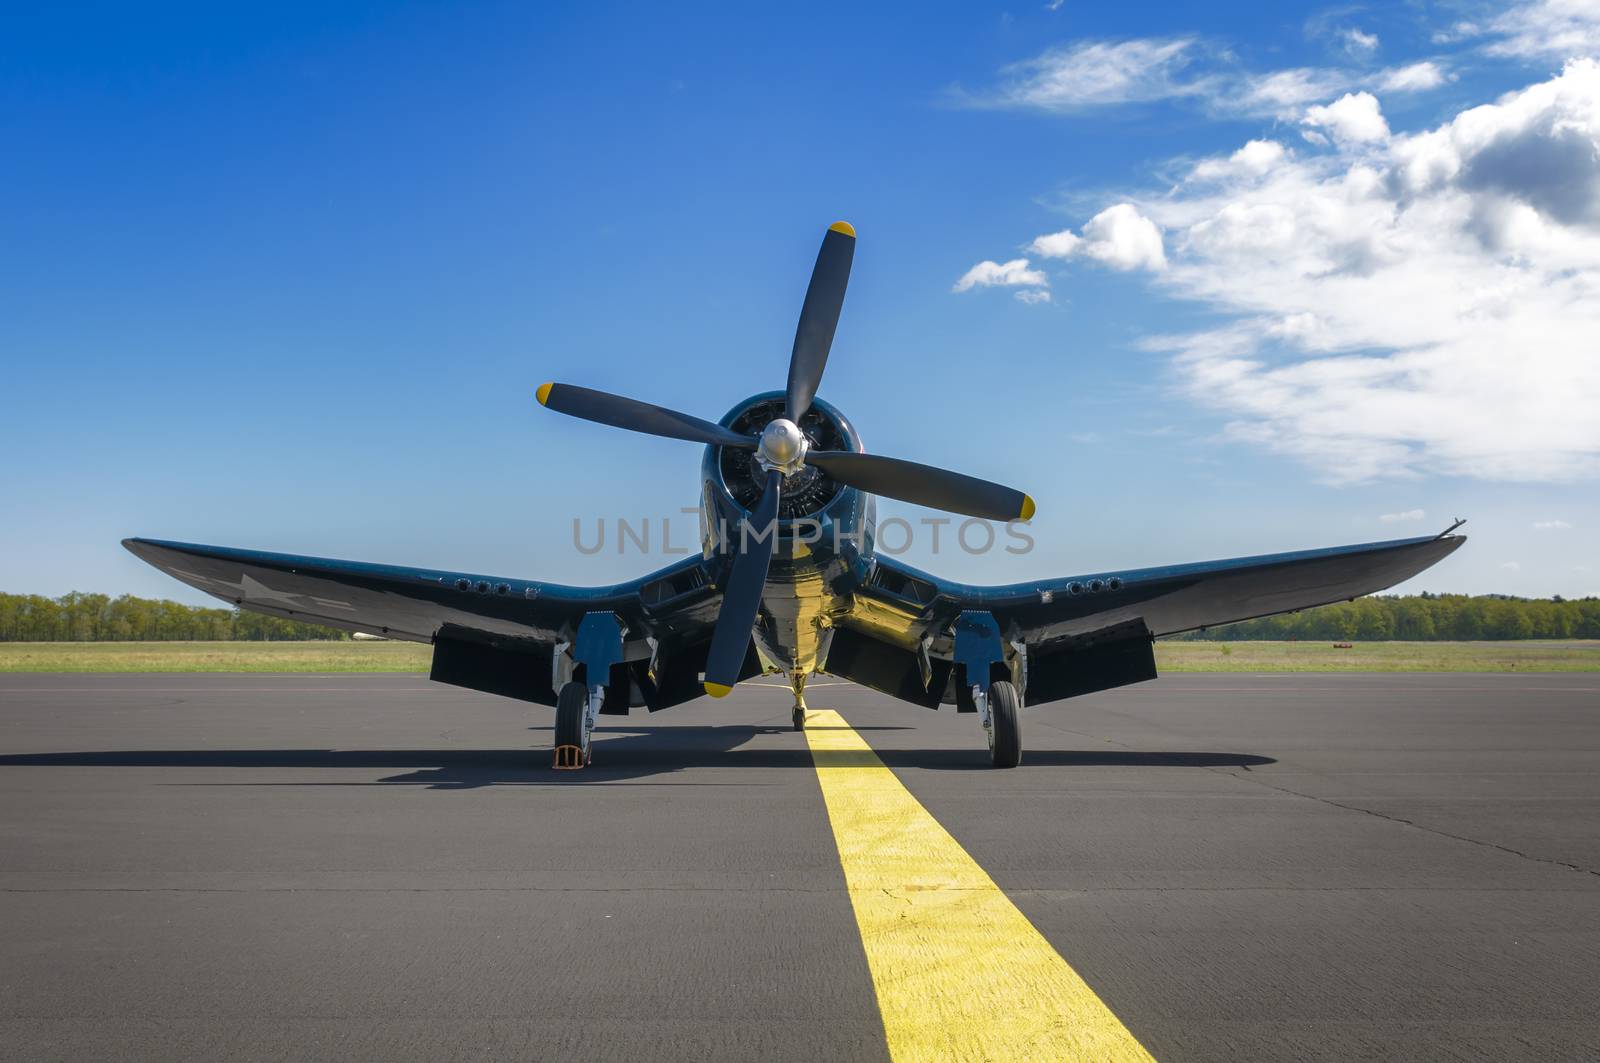 Chance Vought F4U Corsair on static display, front view from bel by asafaric